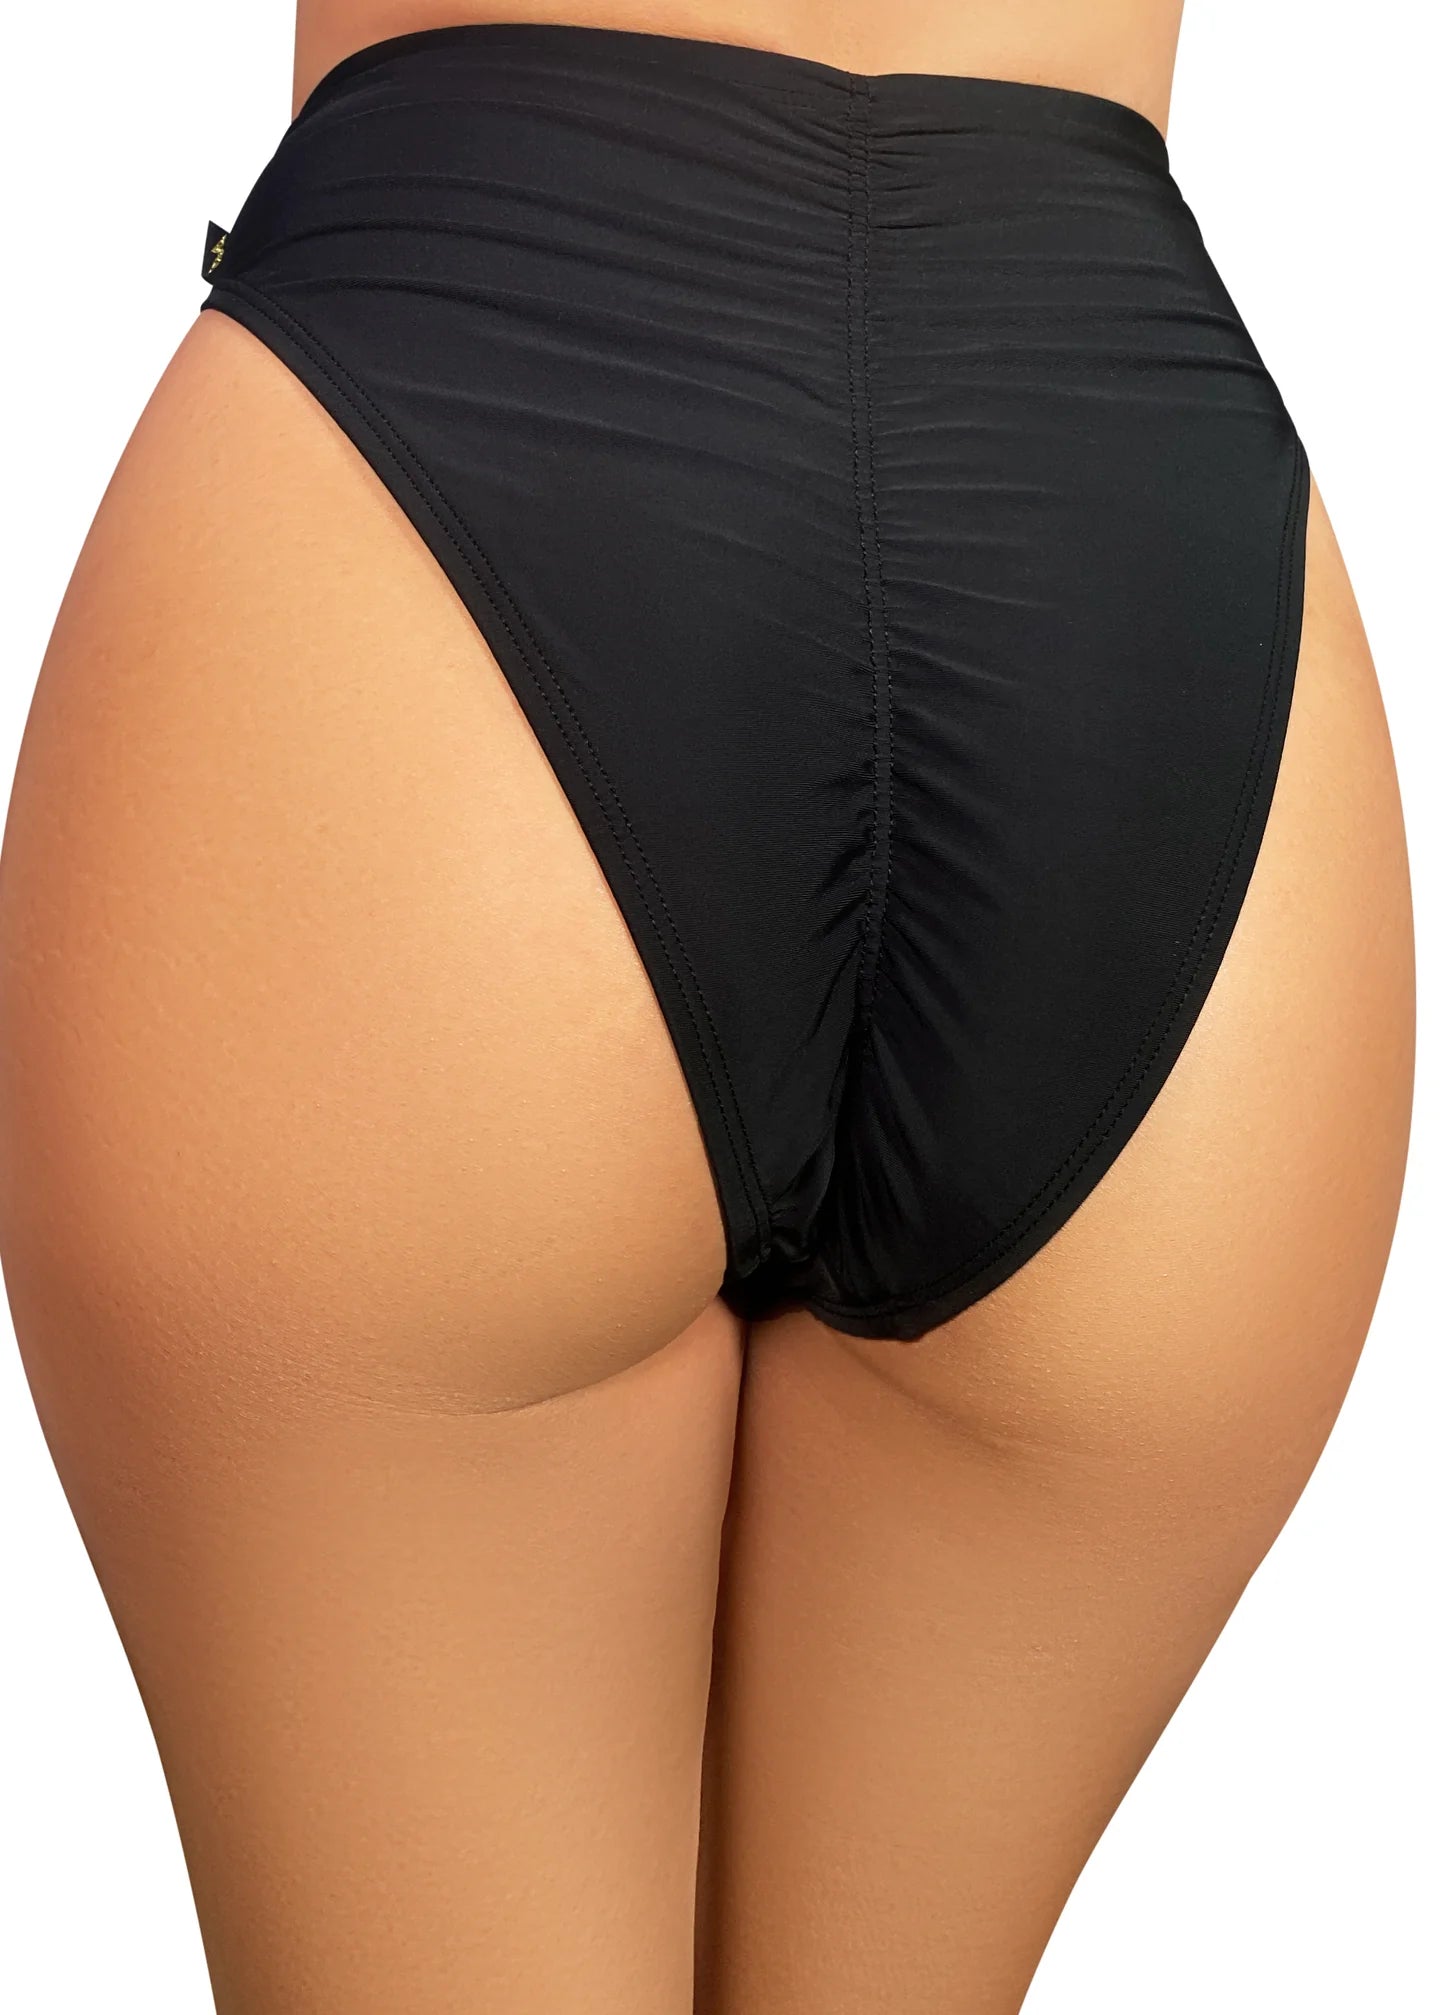 Essential Hight Rider Hot Pants